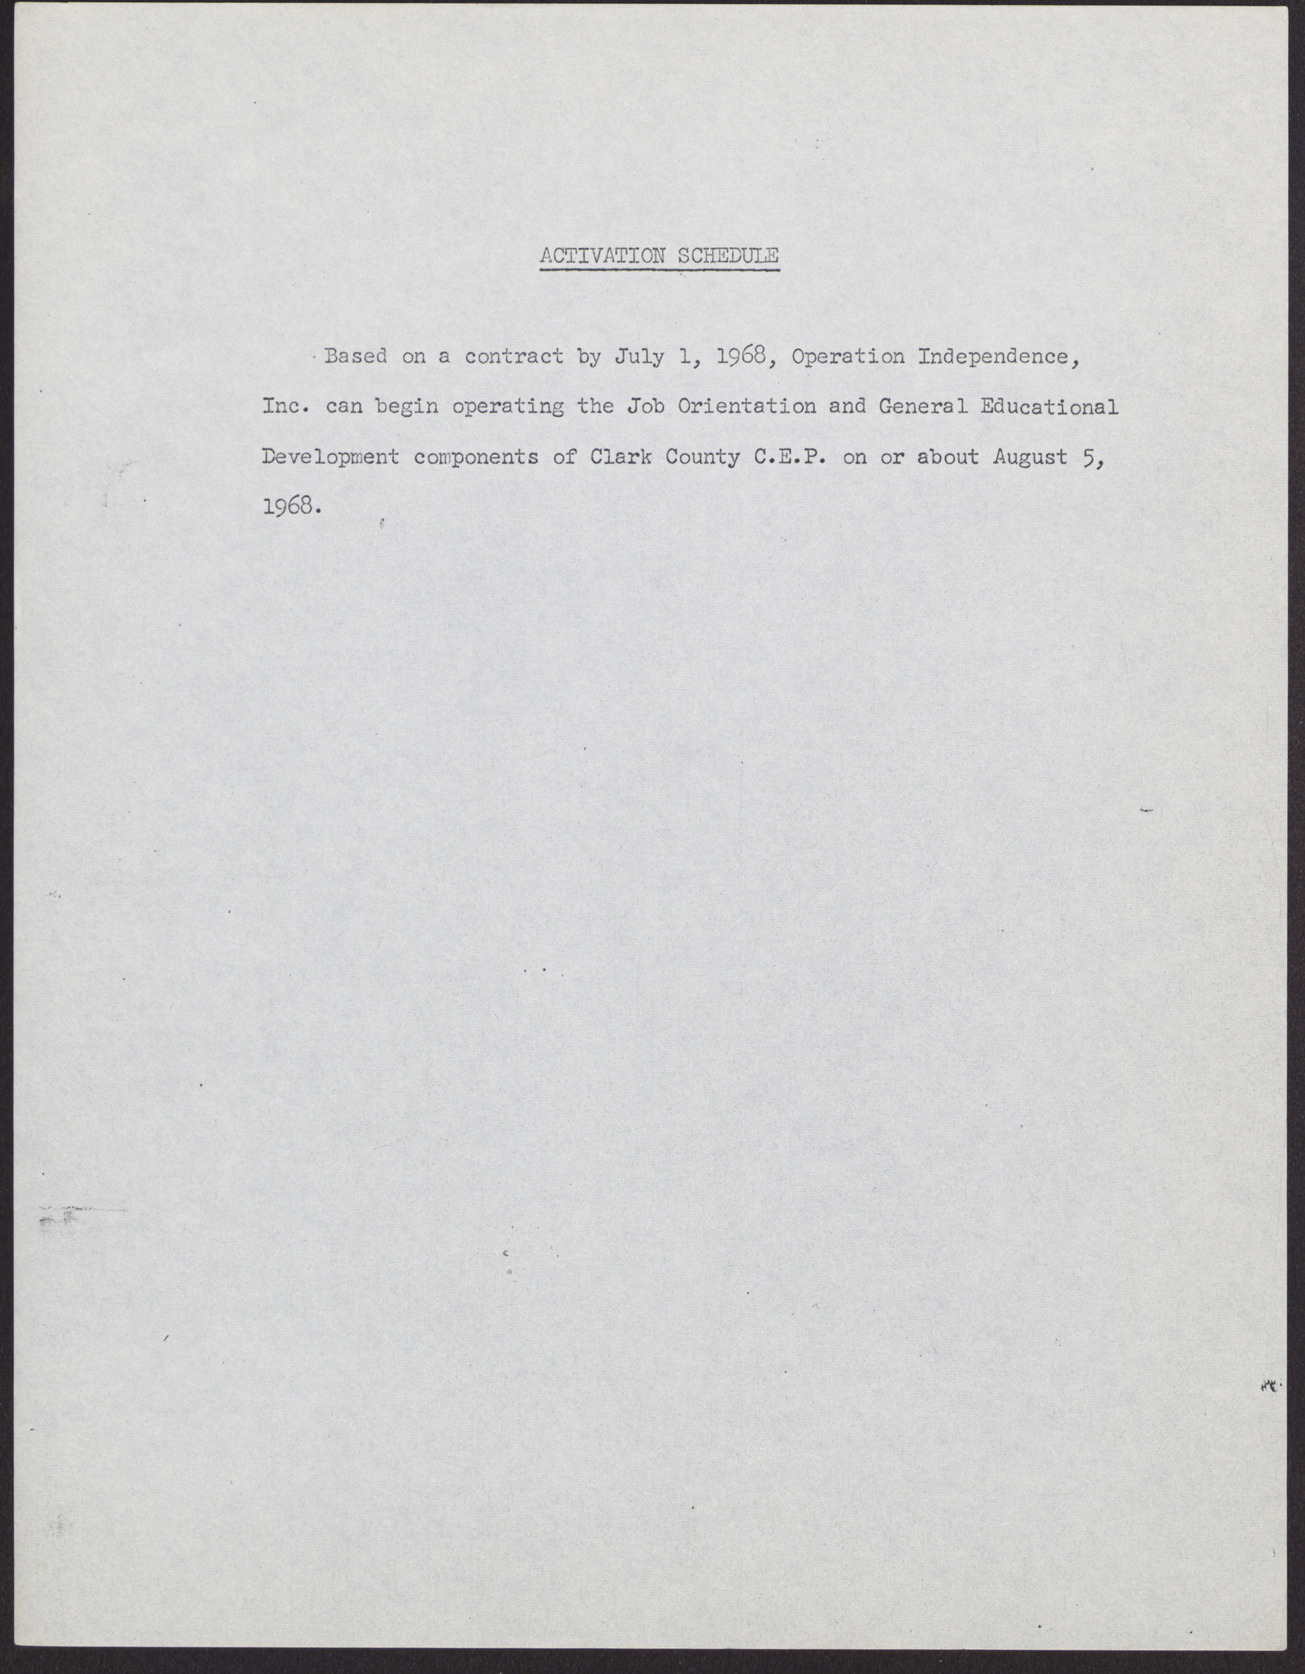 Proposal to the Clark County, Nevada Concentrated Employment Program (21 pages, missing some pages/sections listed in its table of contents), July 2, 1968, page 3